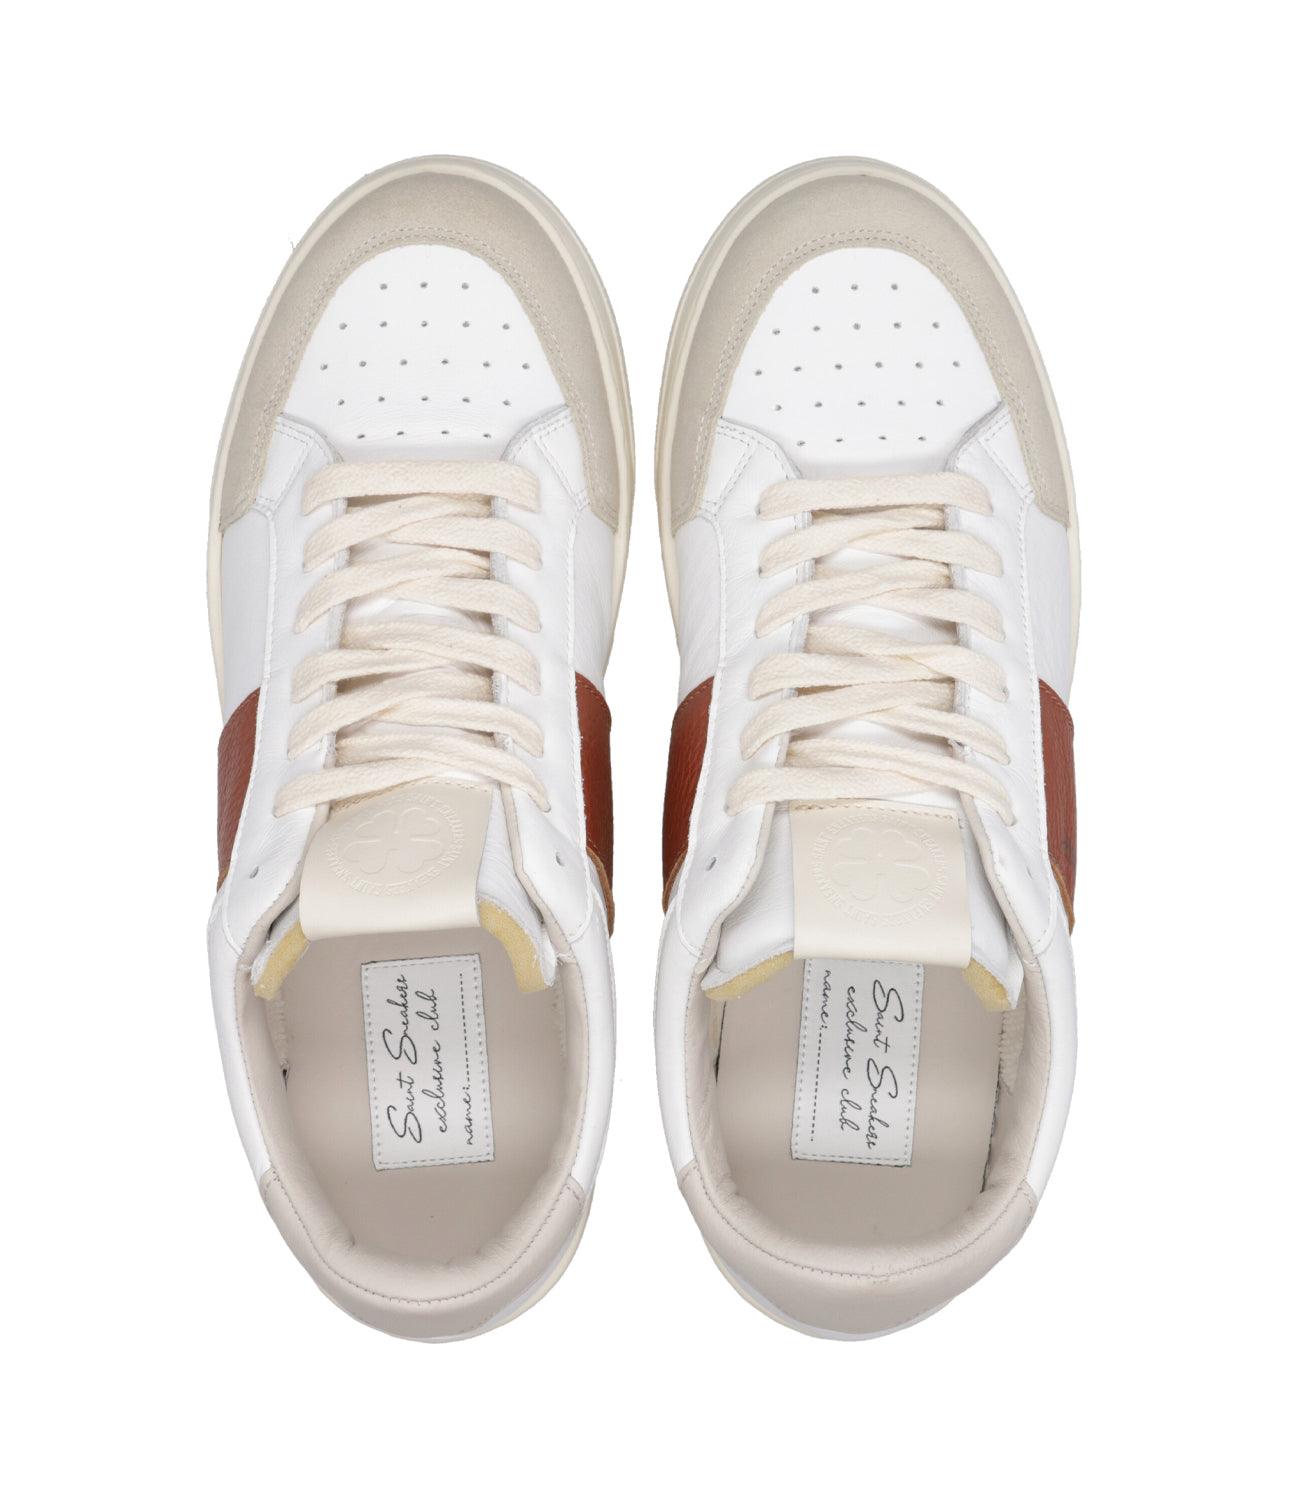 Saint Sneakers | White and Brick Sneakers